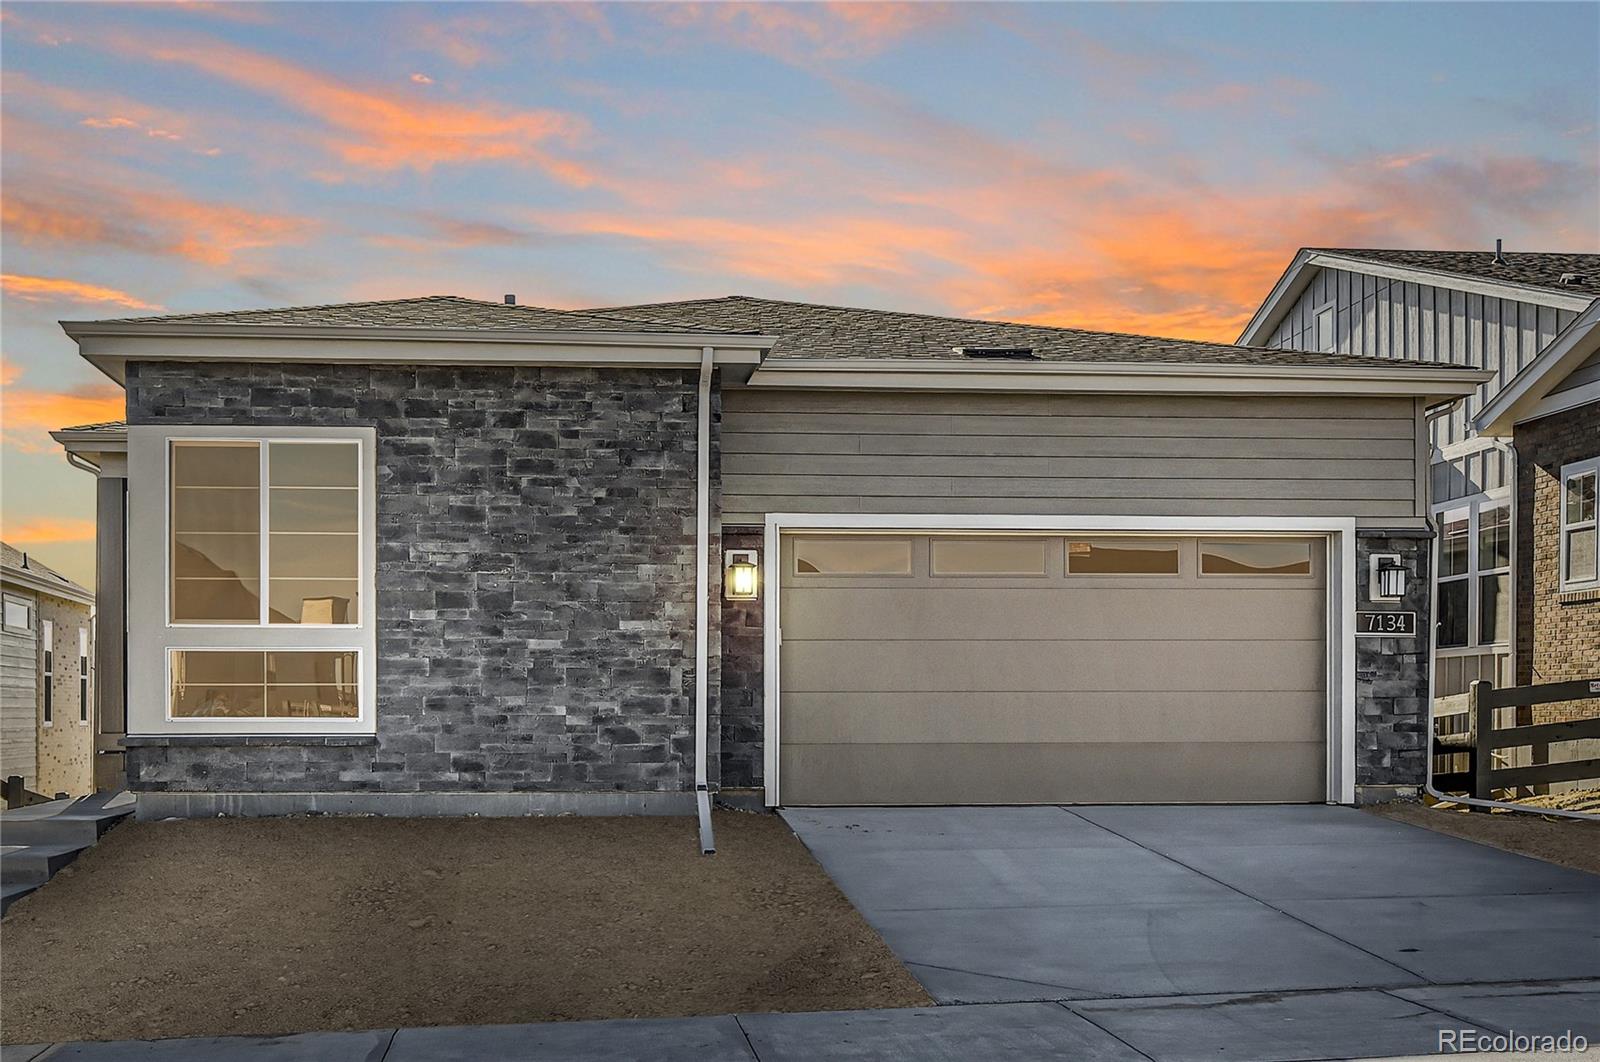 7134  Canyon Sky Trail, castle pines MLS: 2177951 Beds: 3 Baths: 3 Price: $929,000